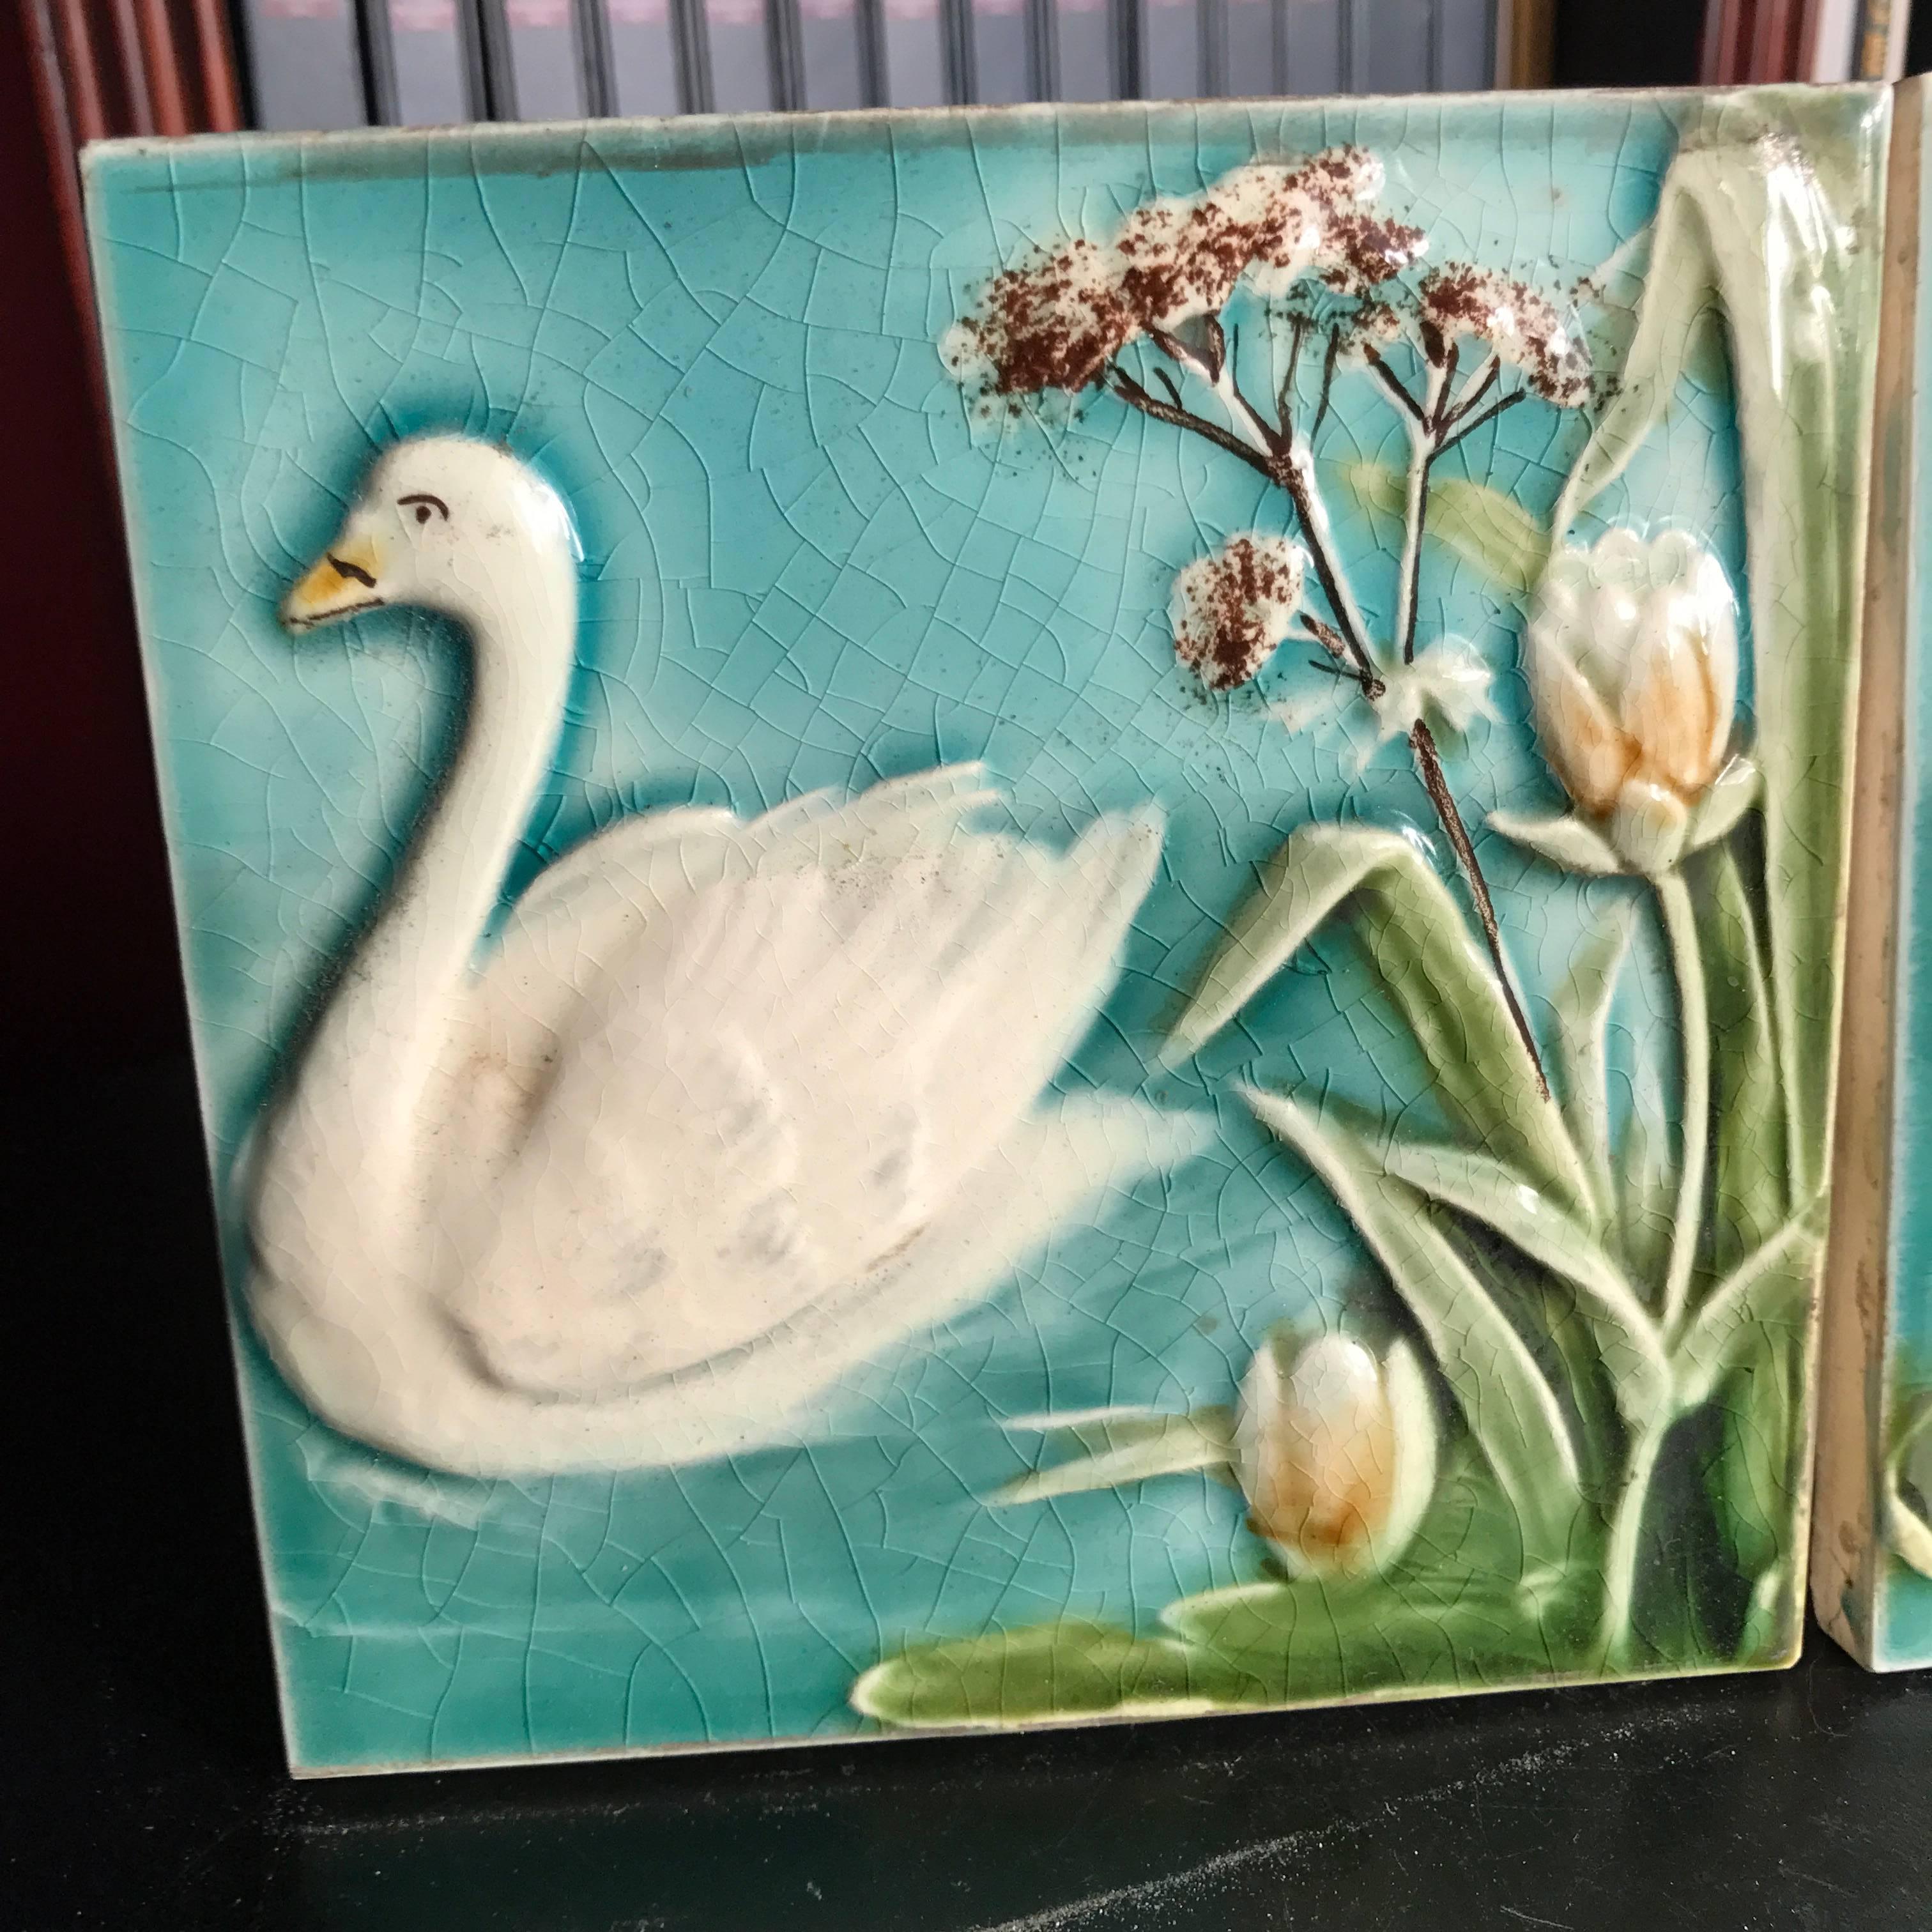 Here's a fine collection of two lovely Art Nouveau ceramic tiles dating to the Jugendstil period (1890-1919), including beautiful swan and lotus flower/lilly designs.

Dimensions: Each tile is 5.5 inches square and .375 inches thick
 Pair tiles